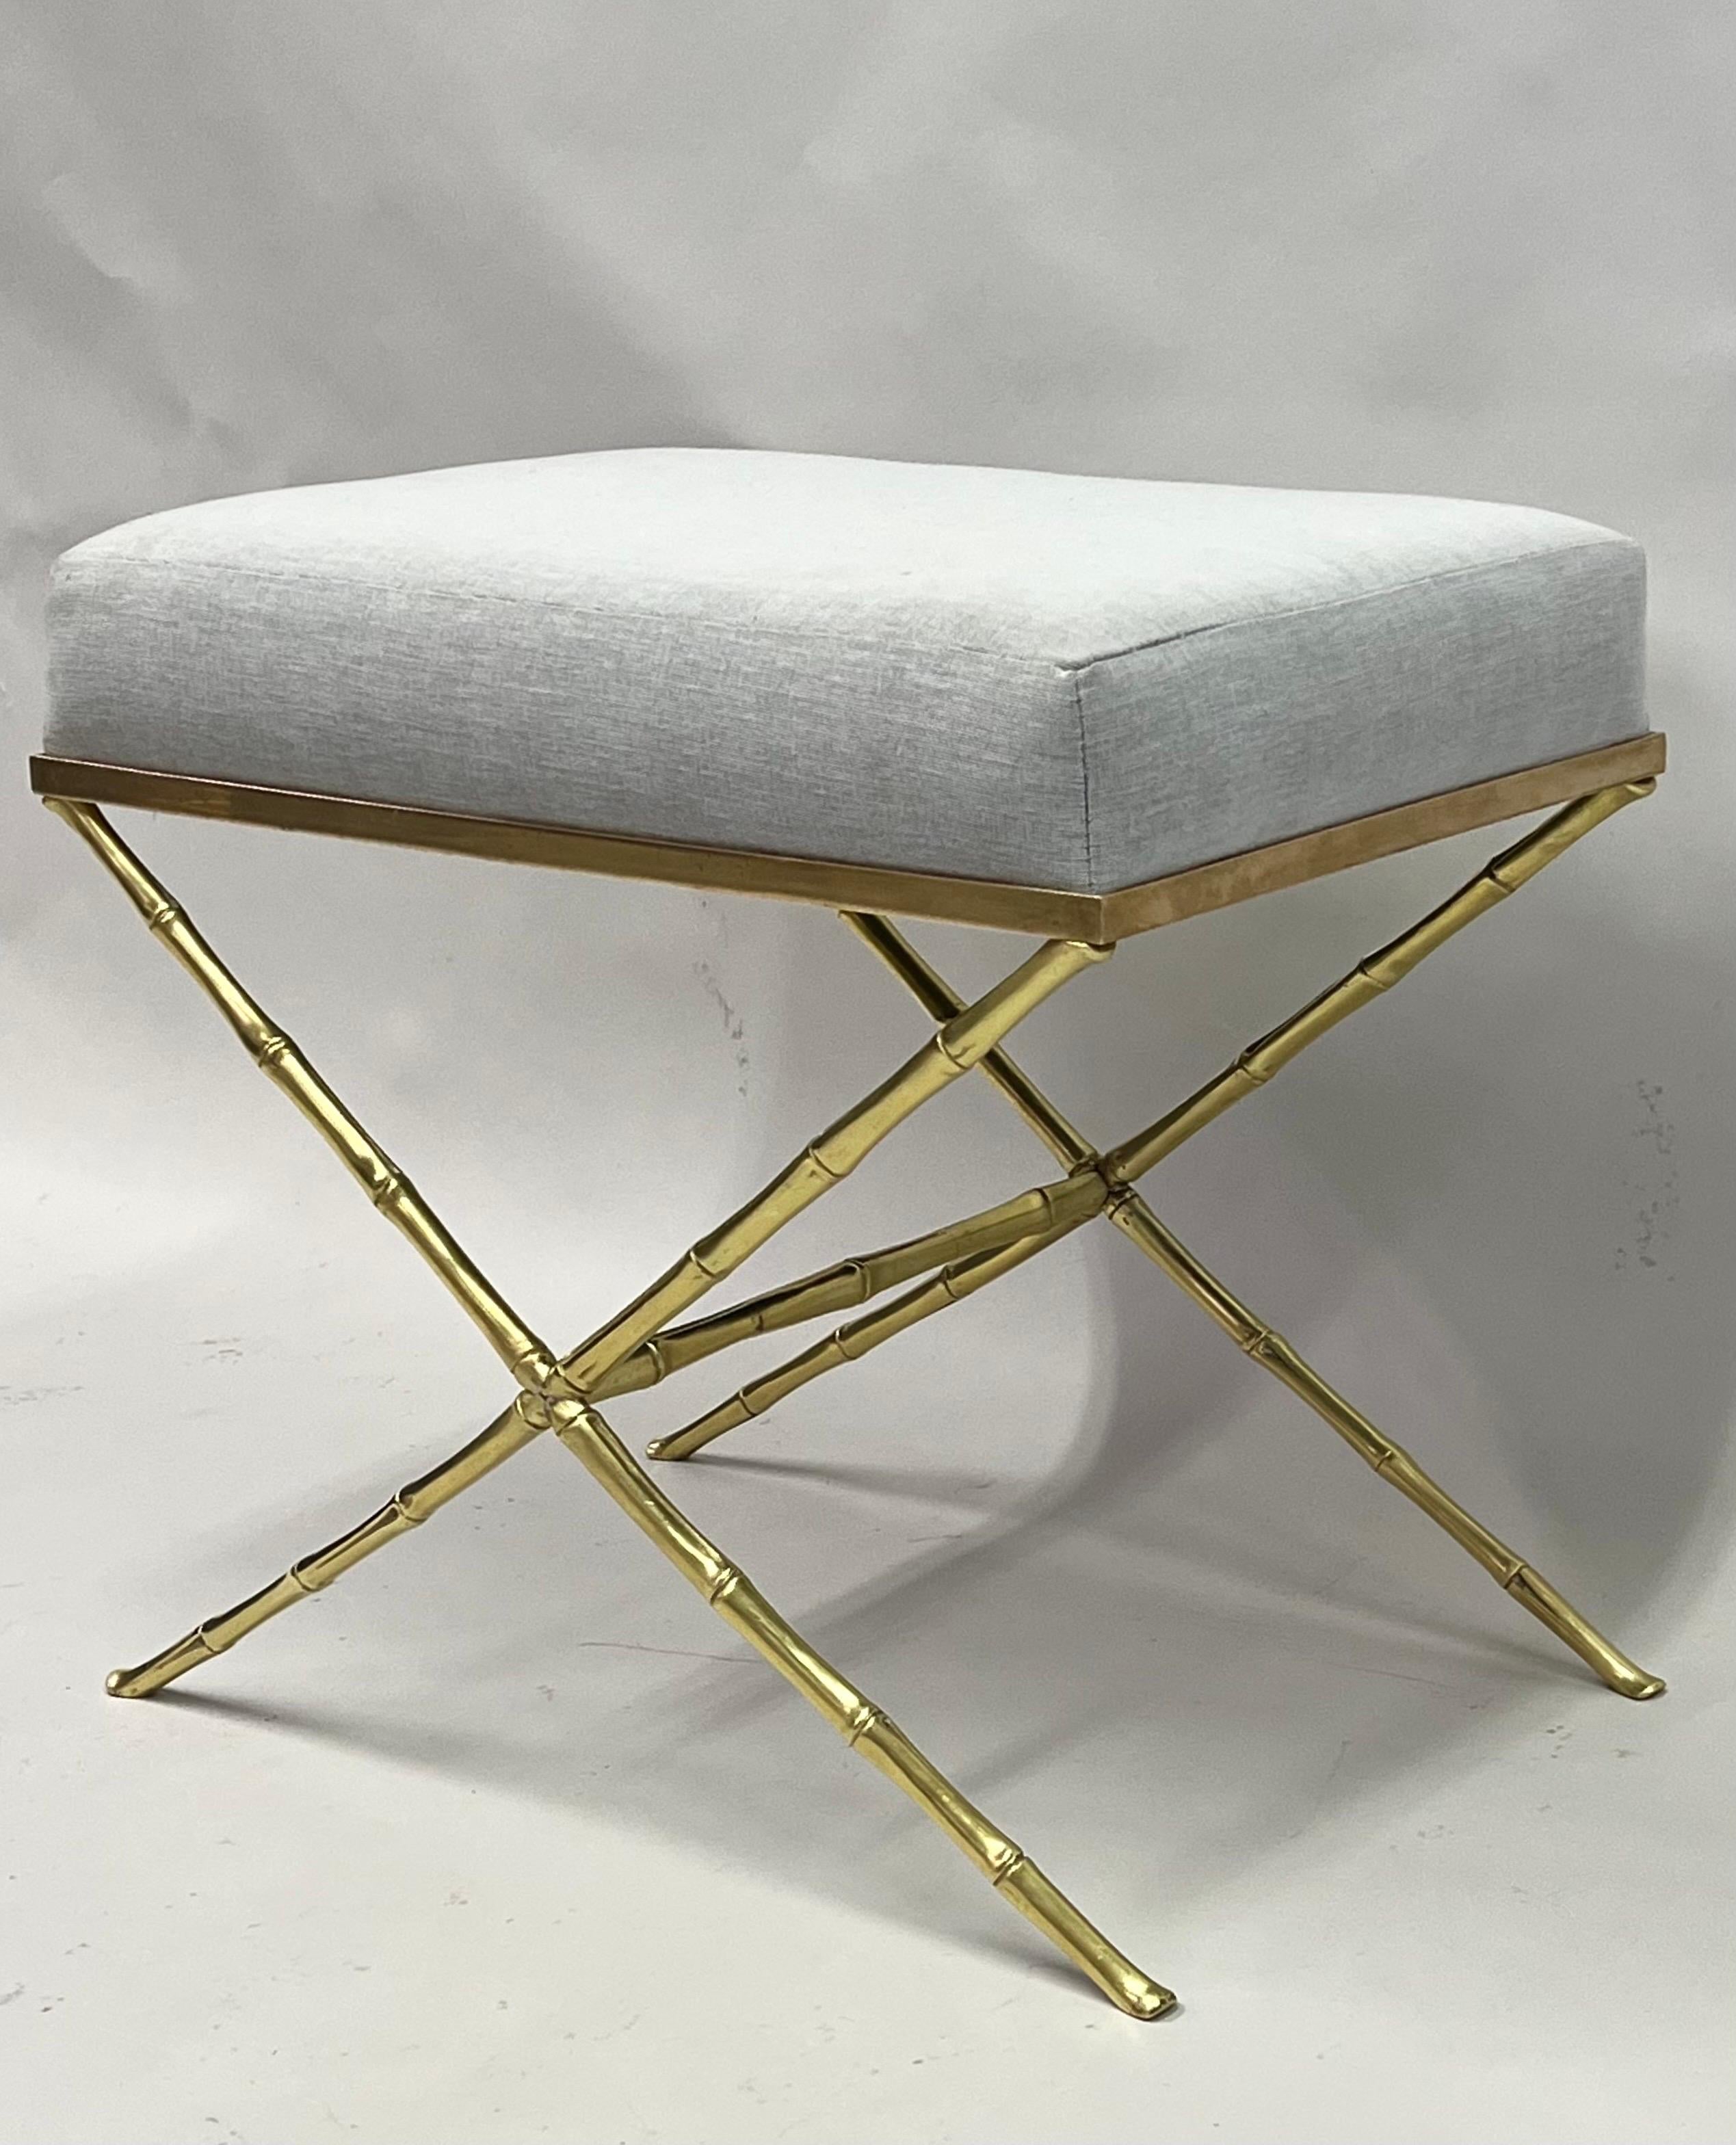 An elegant and timeless French Mid-Century Modern neoclassical bench or stool by Maison Baguès in solid brass. The piece has pure lines with a classical X-frame or Curile form base structure and is composed of brass faux bamboo. Simplicity and